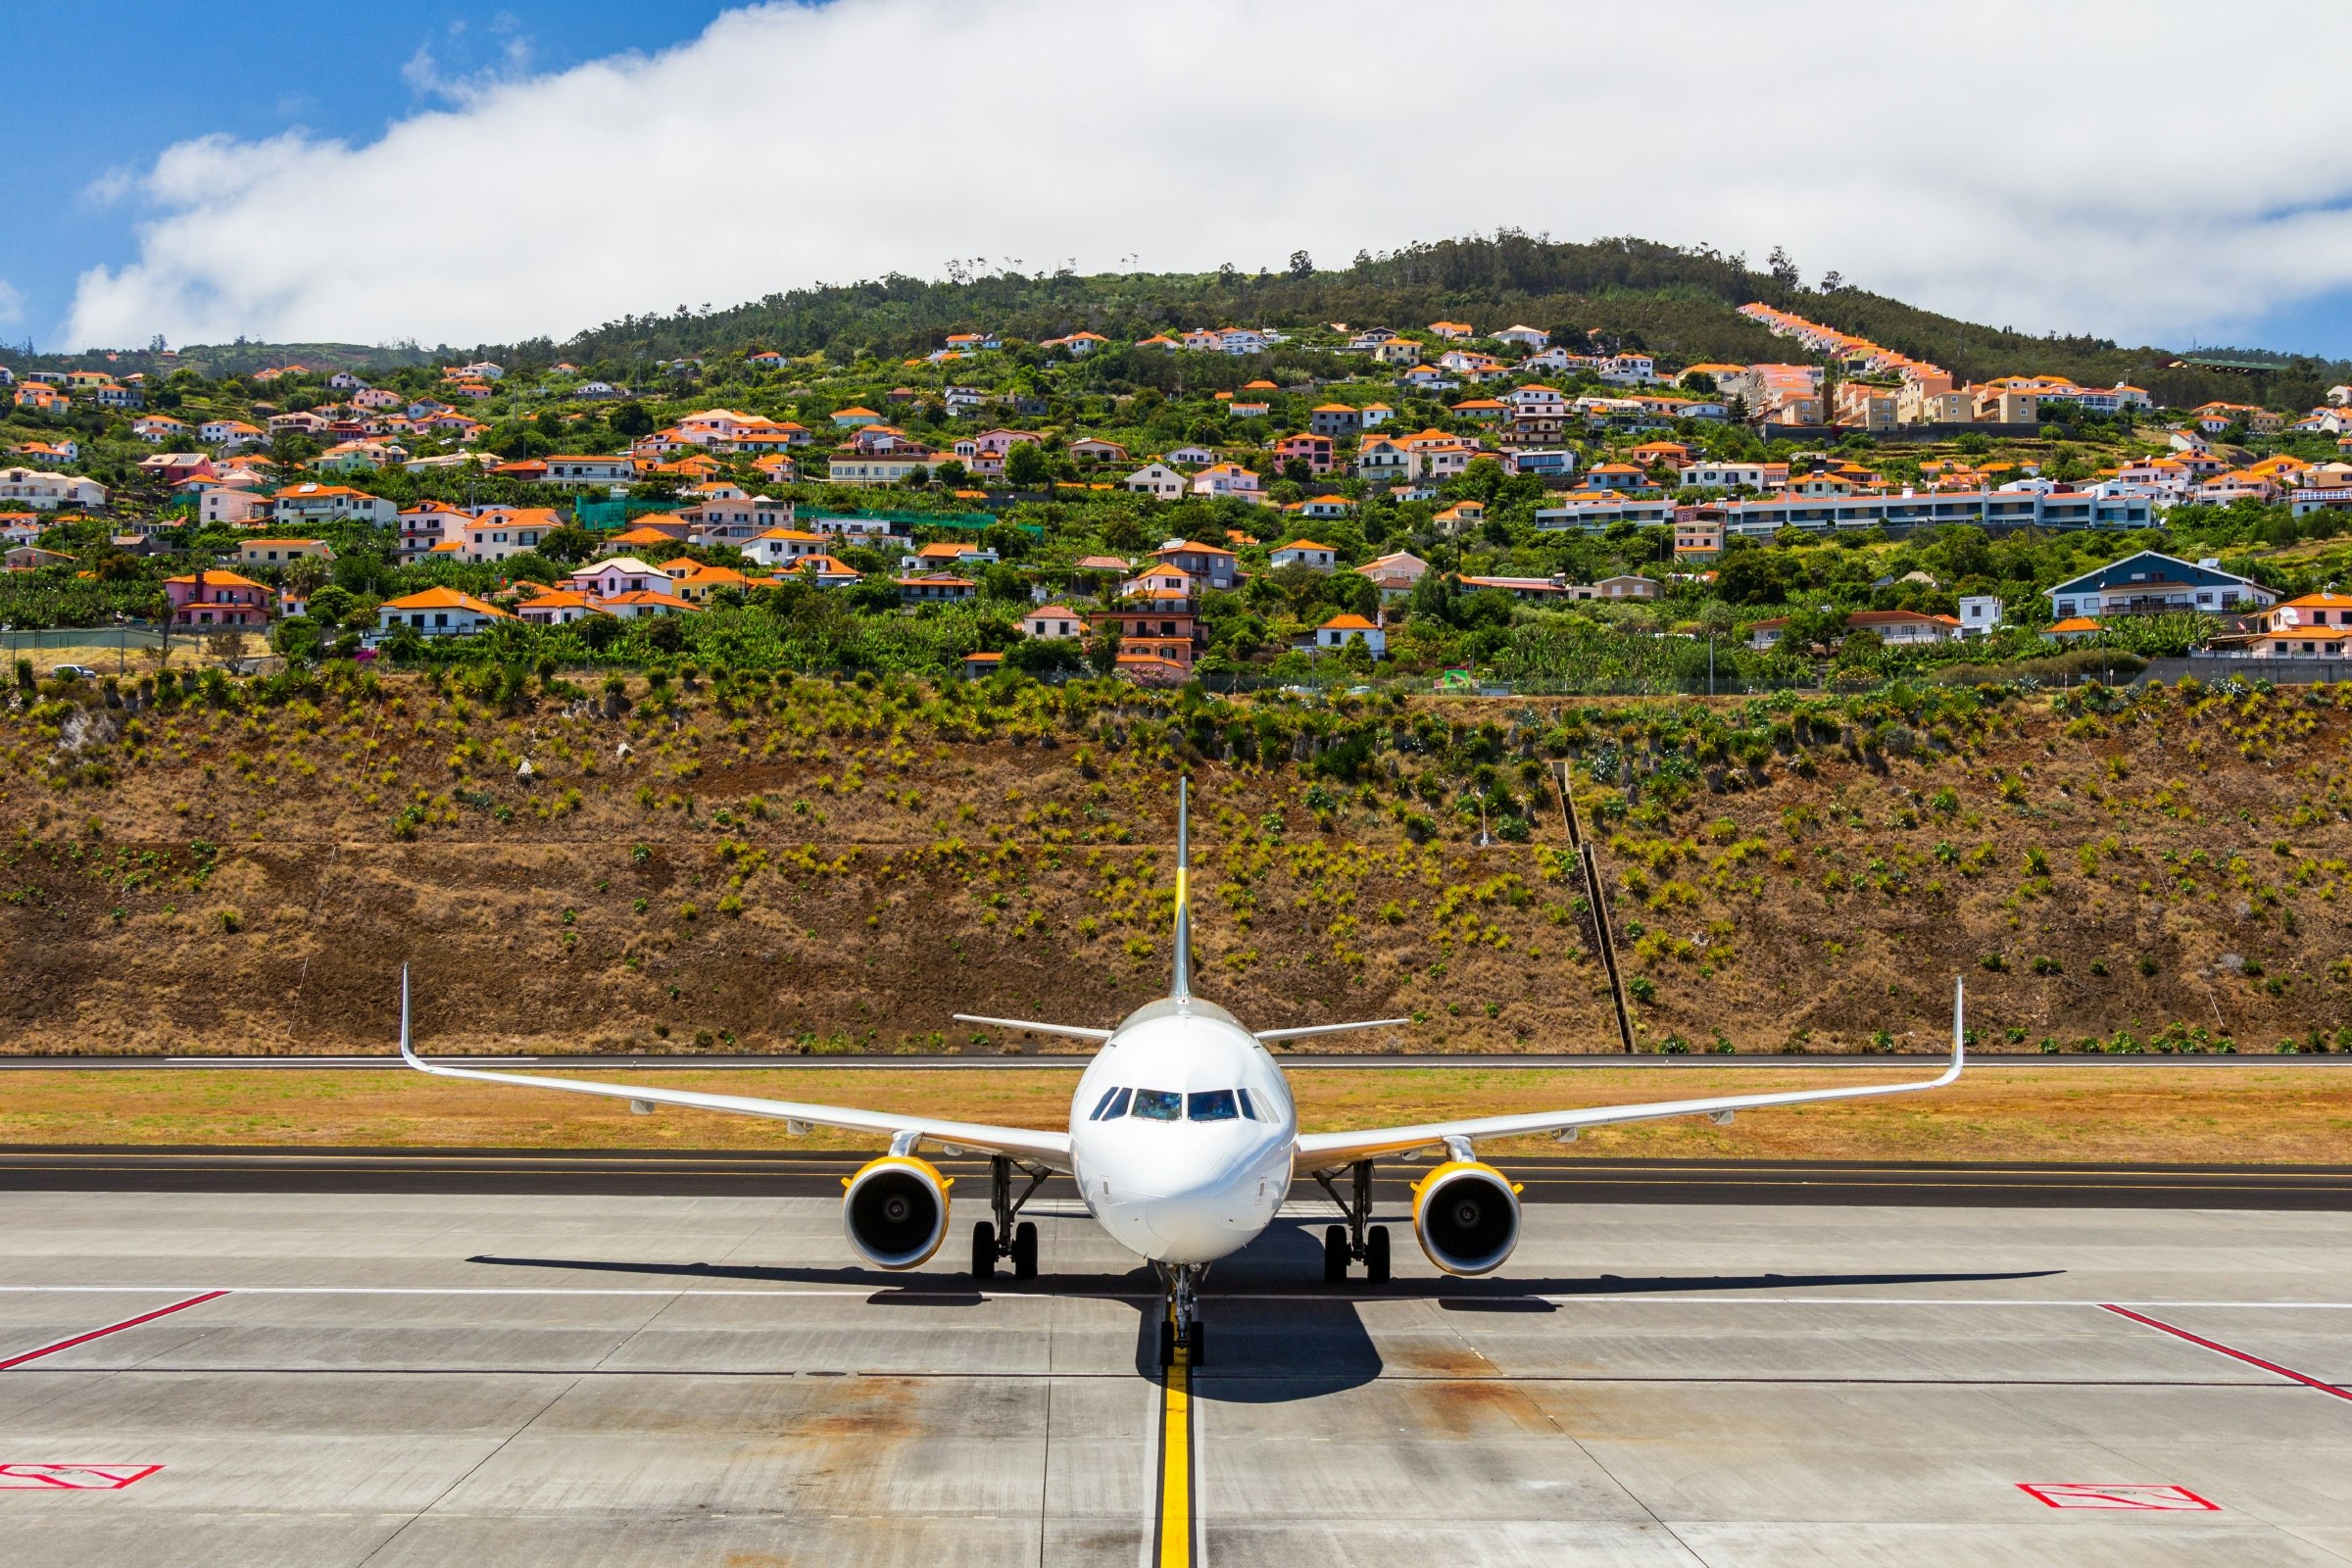 Passenger jet on the airport tarmac with Agua de Pena village in the background in Madeira, Portugal